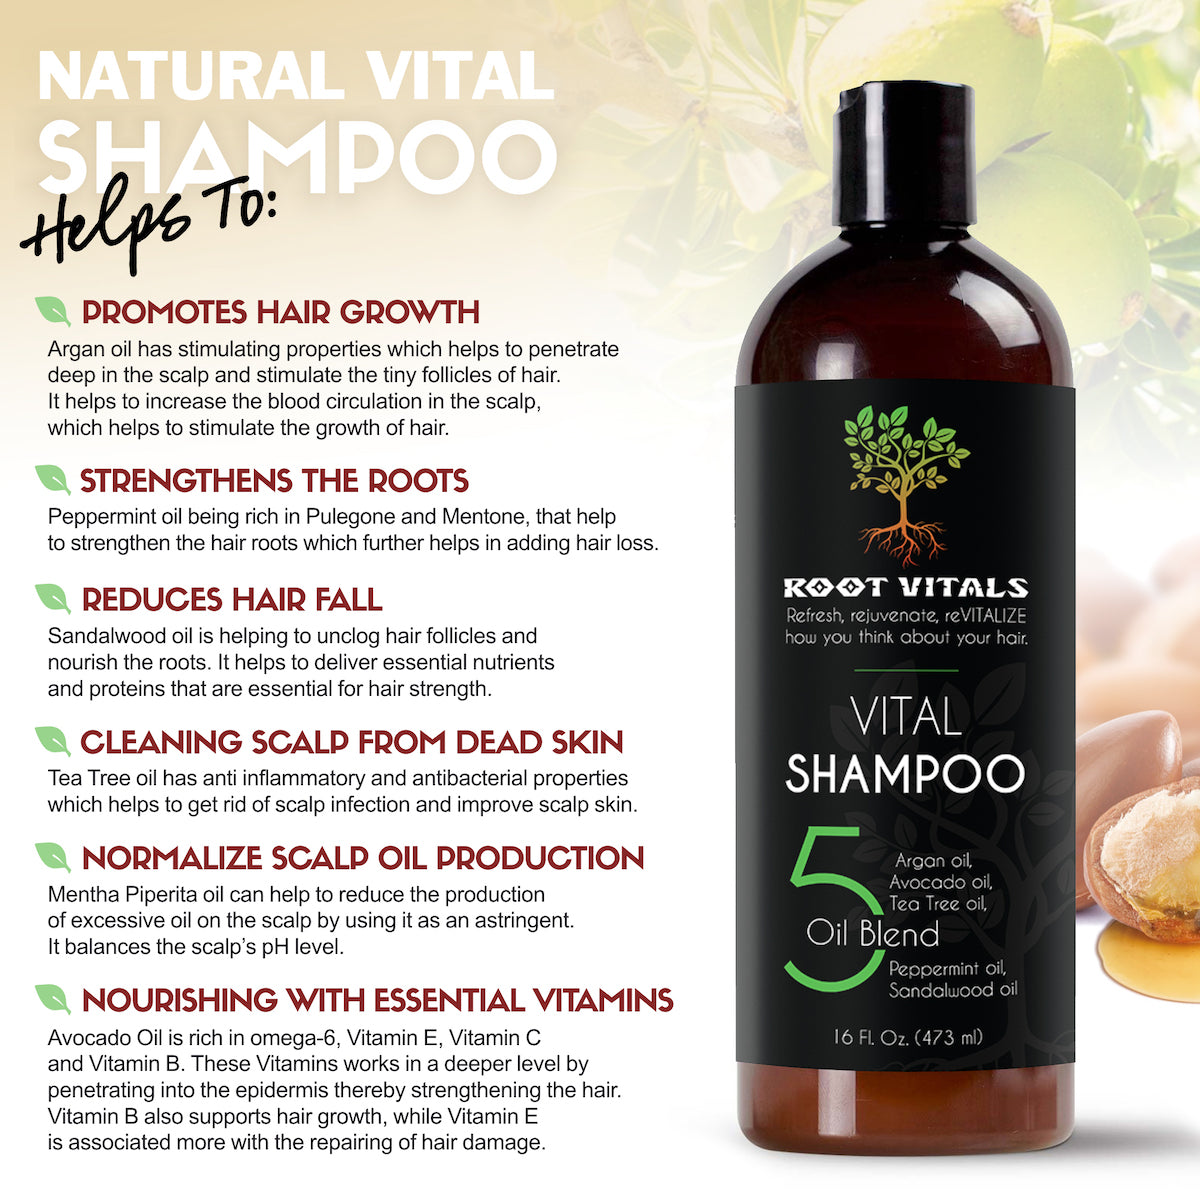 Vital Shampoo for Natural Hair Growth and Shampoo for thinning hair  helps with